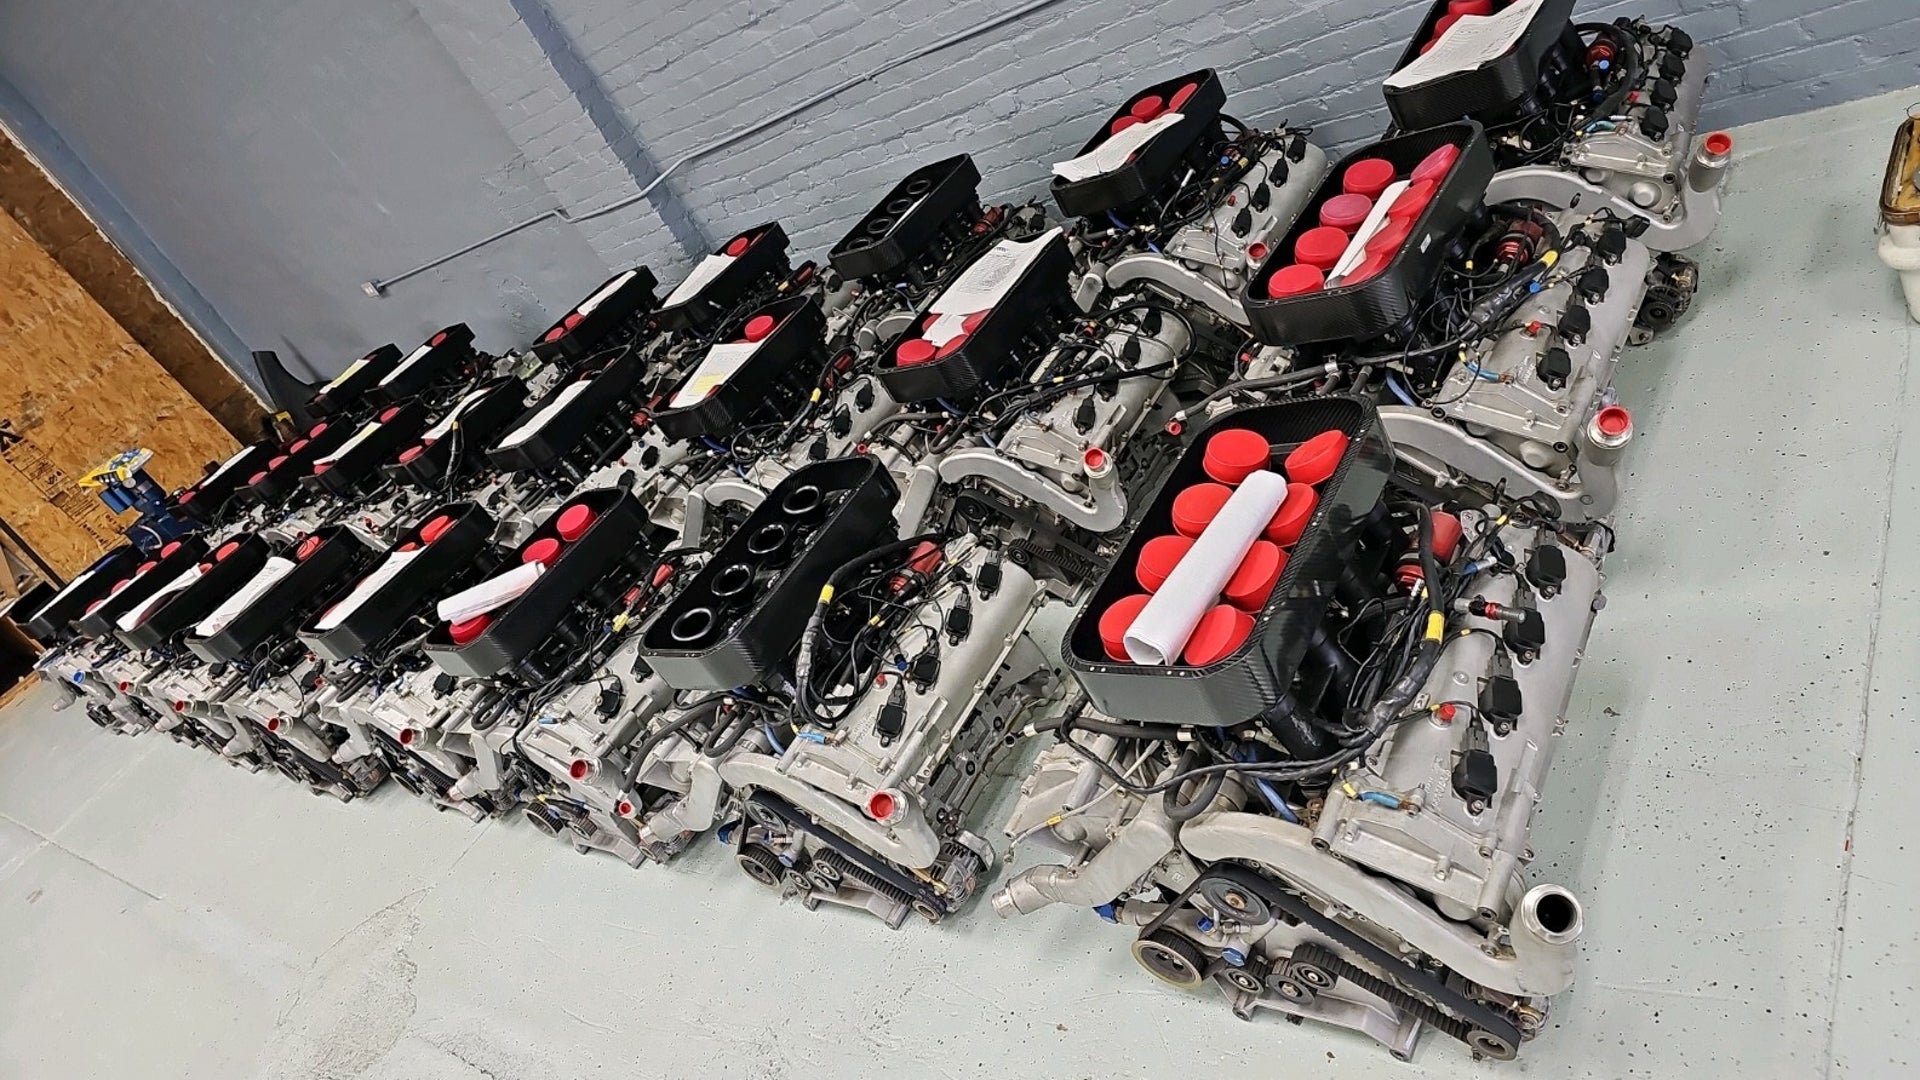 There Are a Bunch of Gently Used Nissan Indy Pro V8s for Sale on Facebook